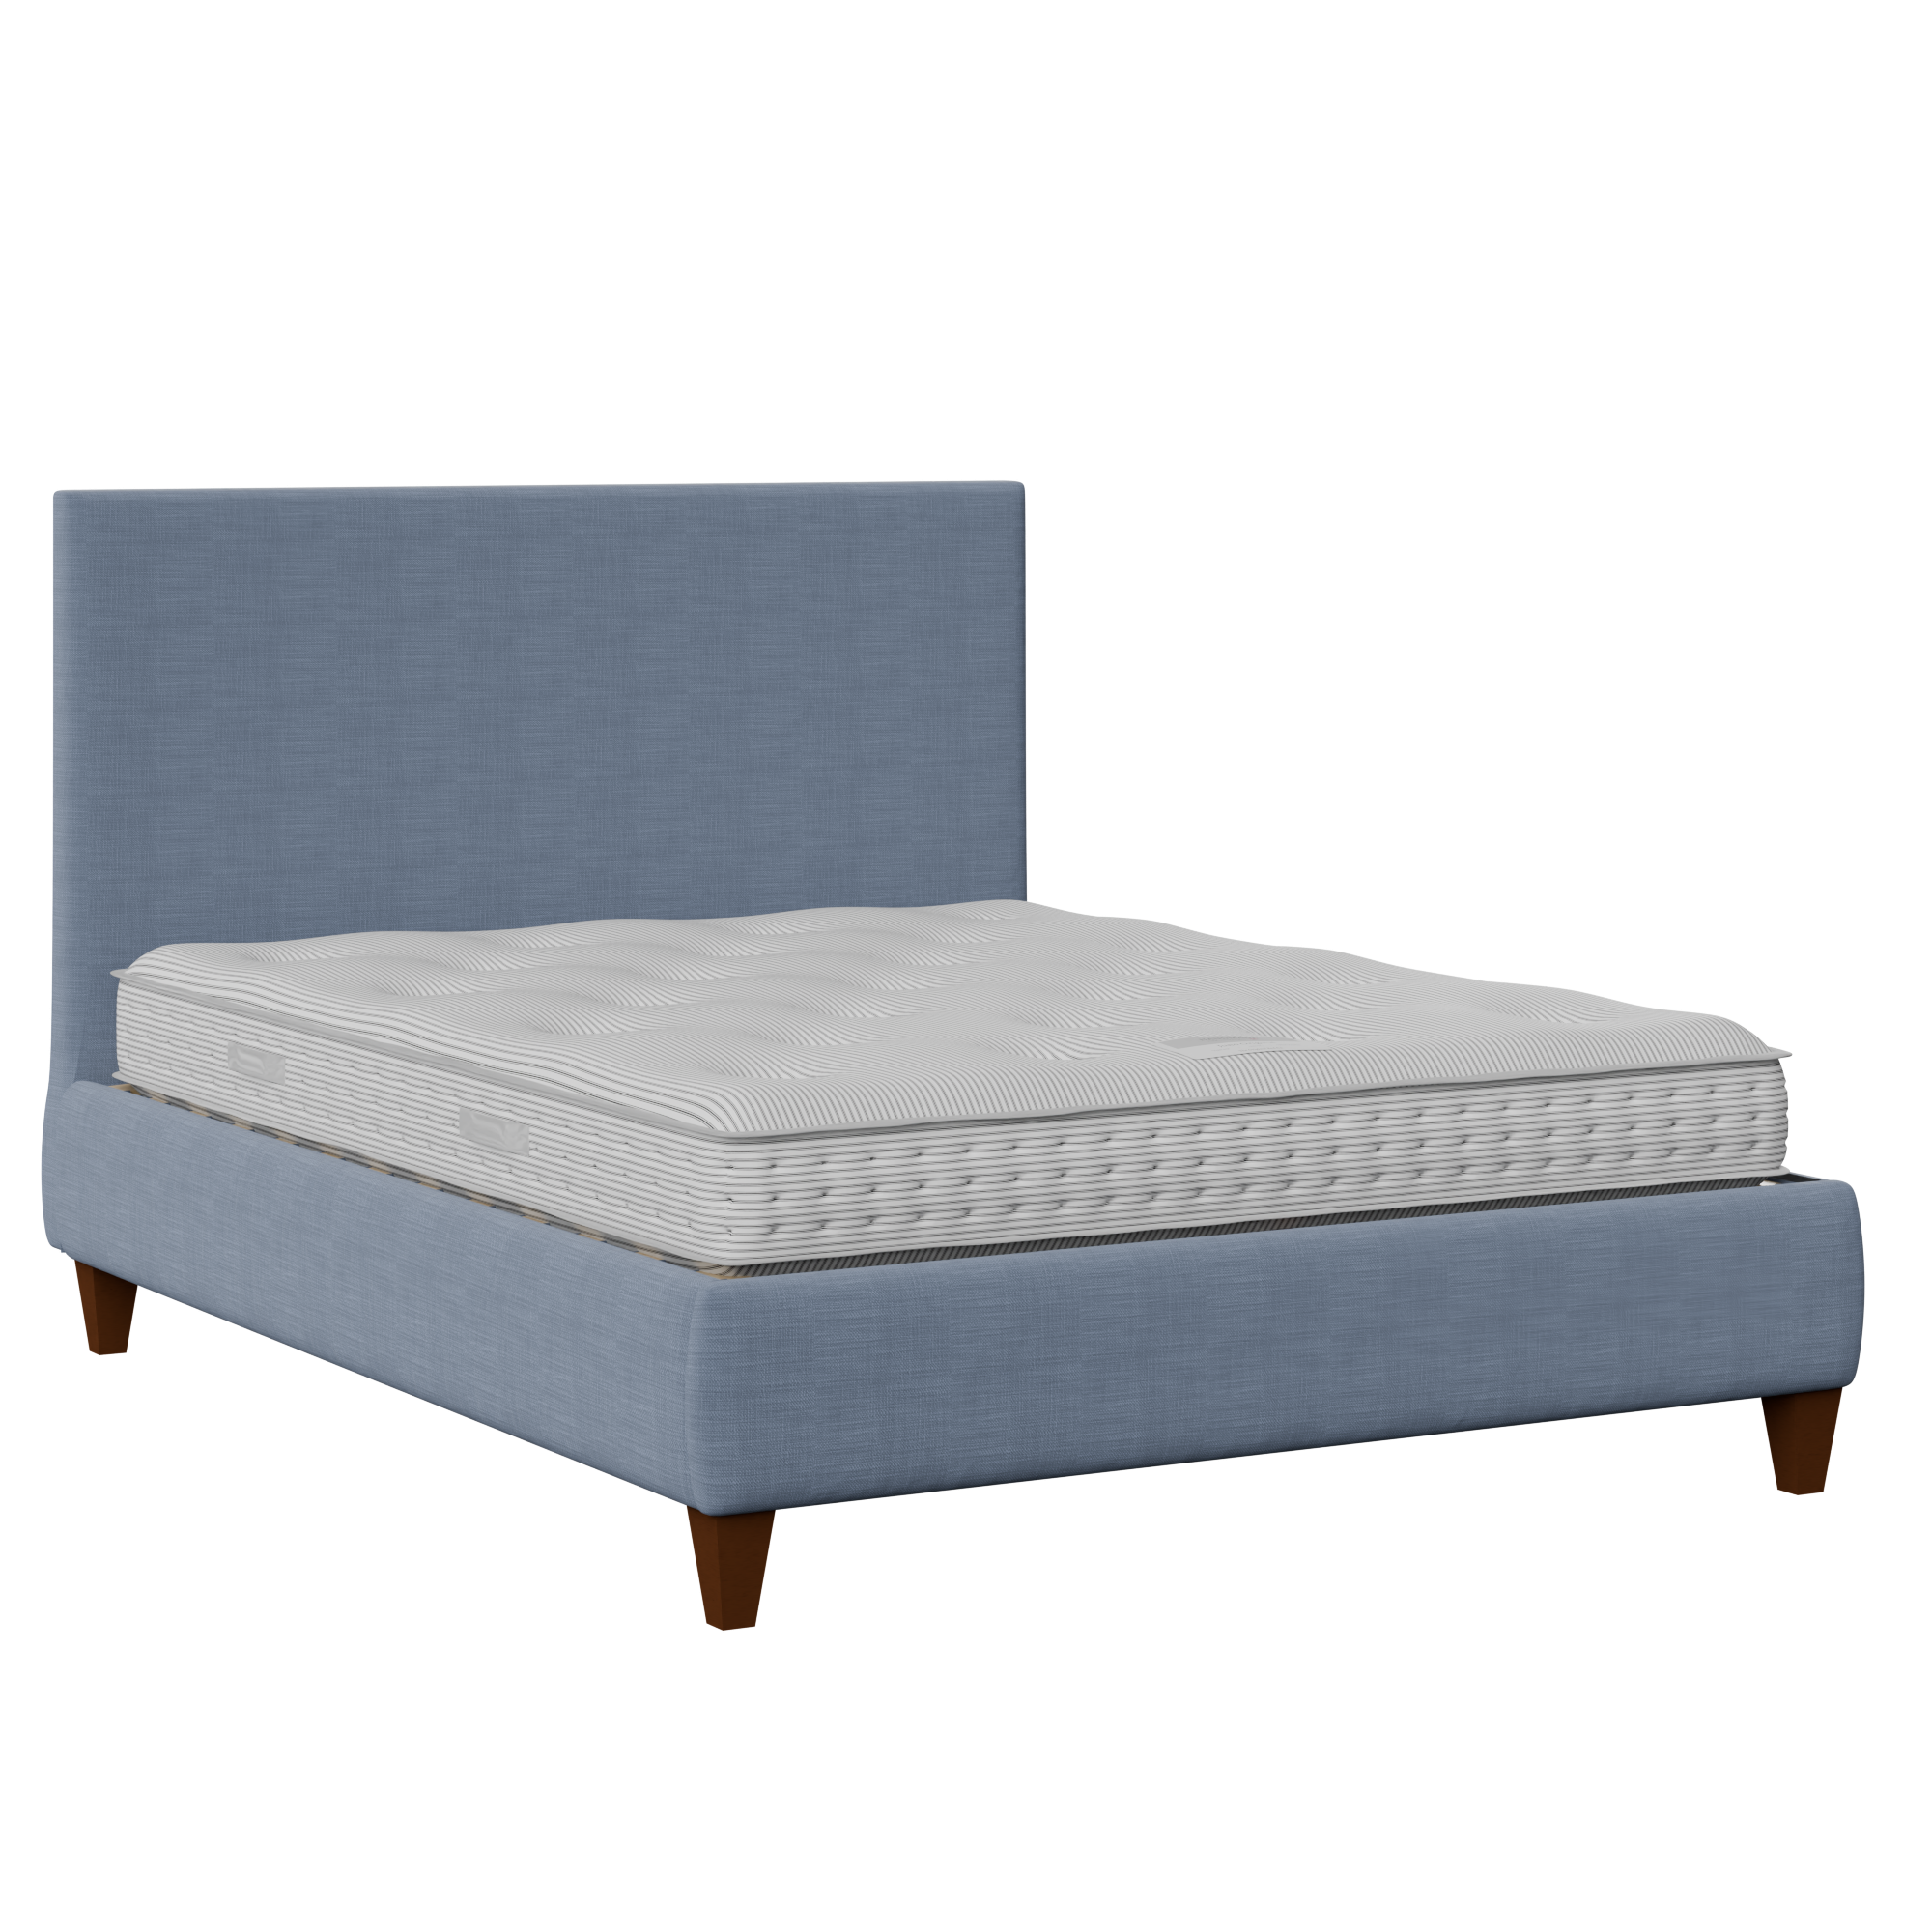 Yushan upholstered bed in blue fabric